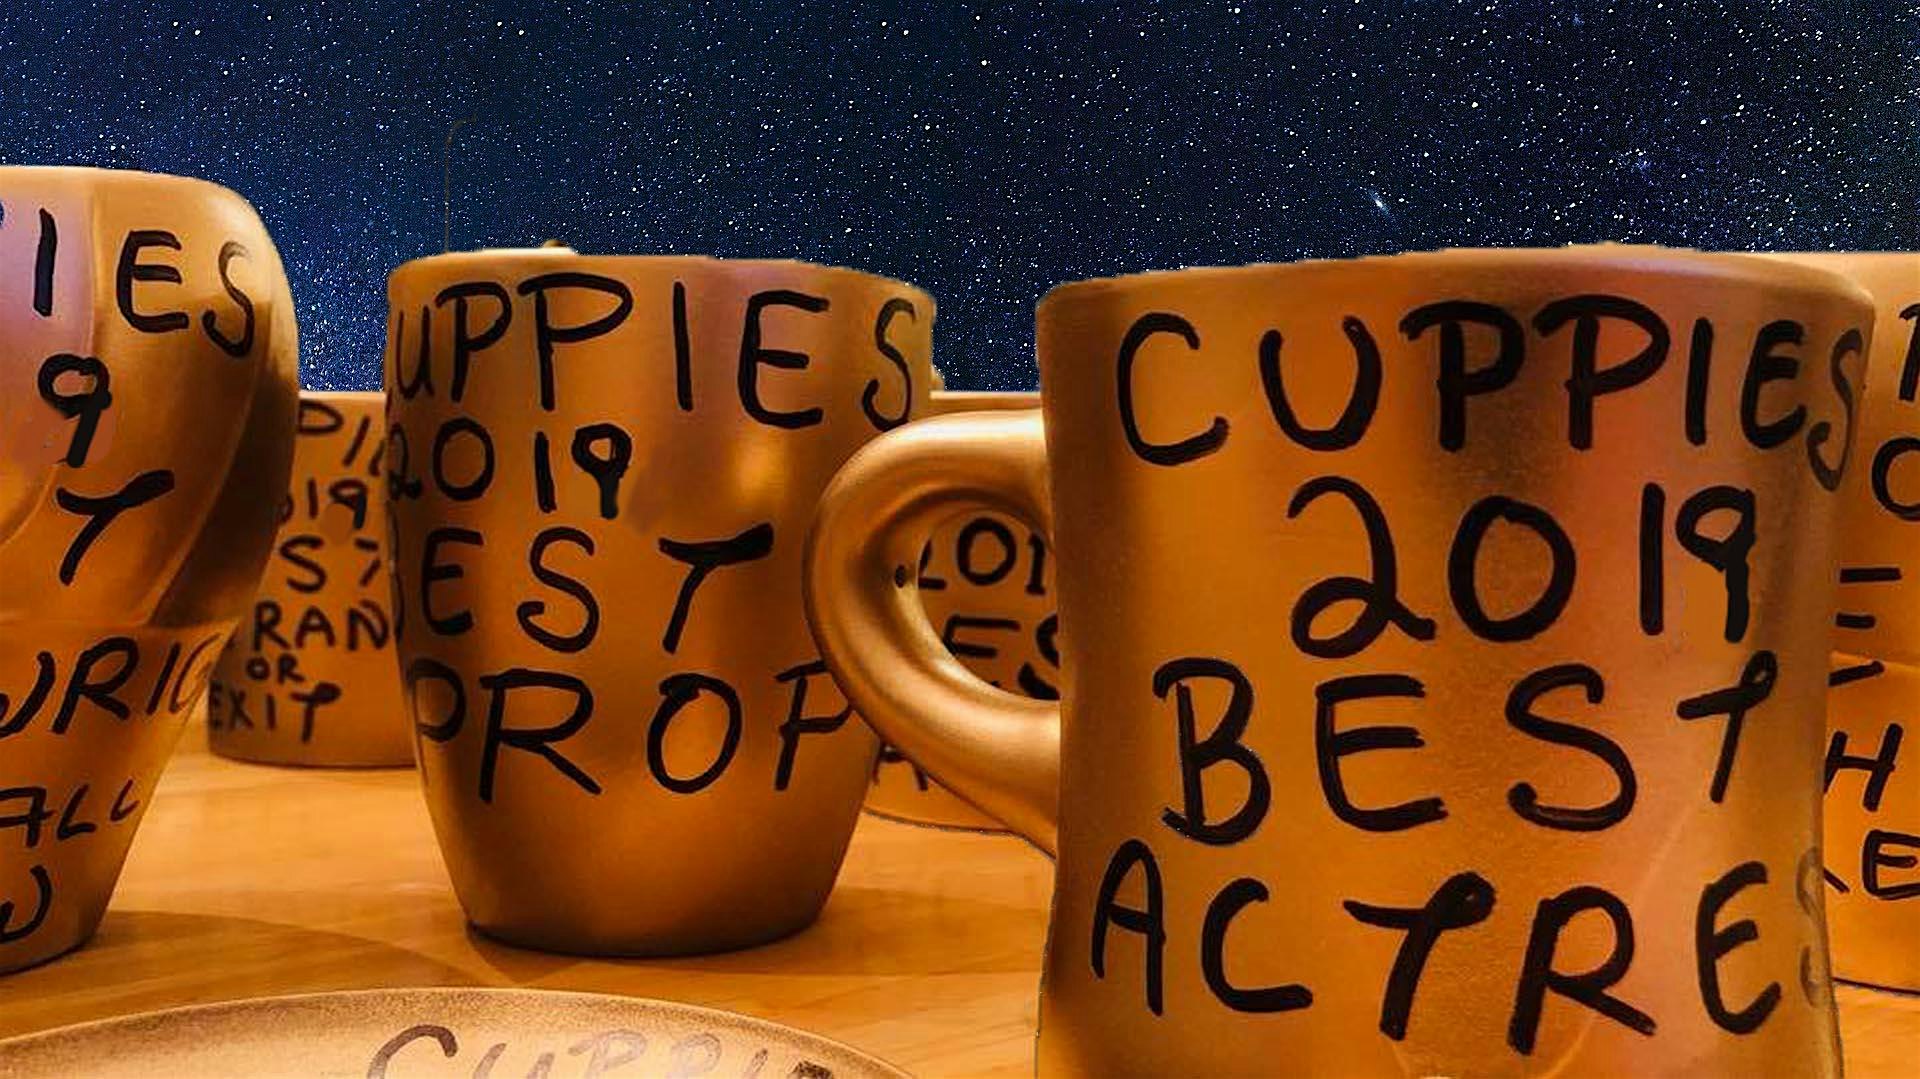 The 2019 Cuppies: A Festival of One Acts and Awards